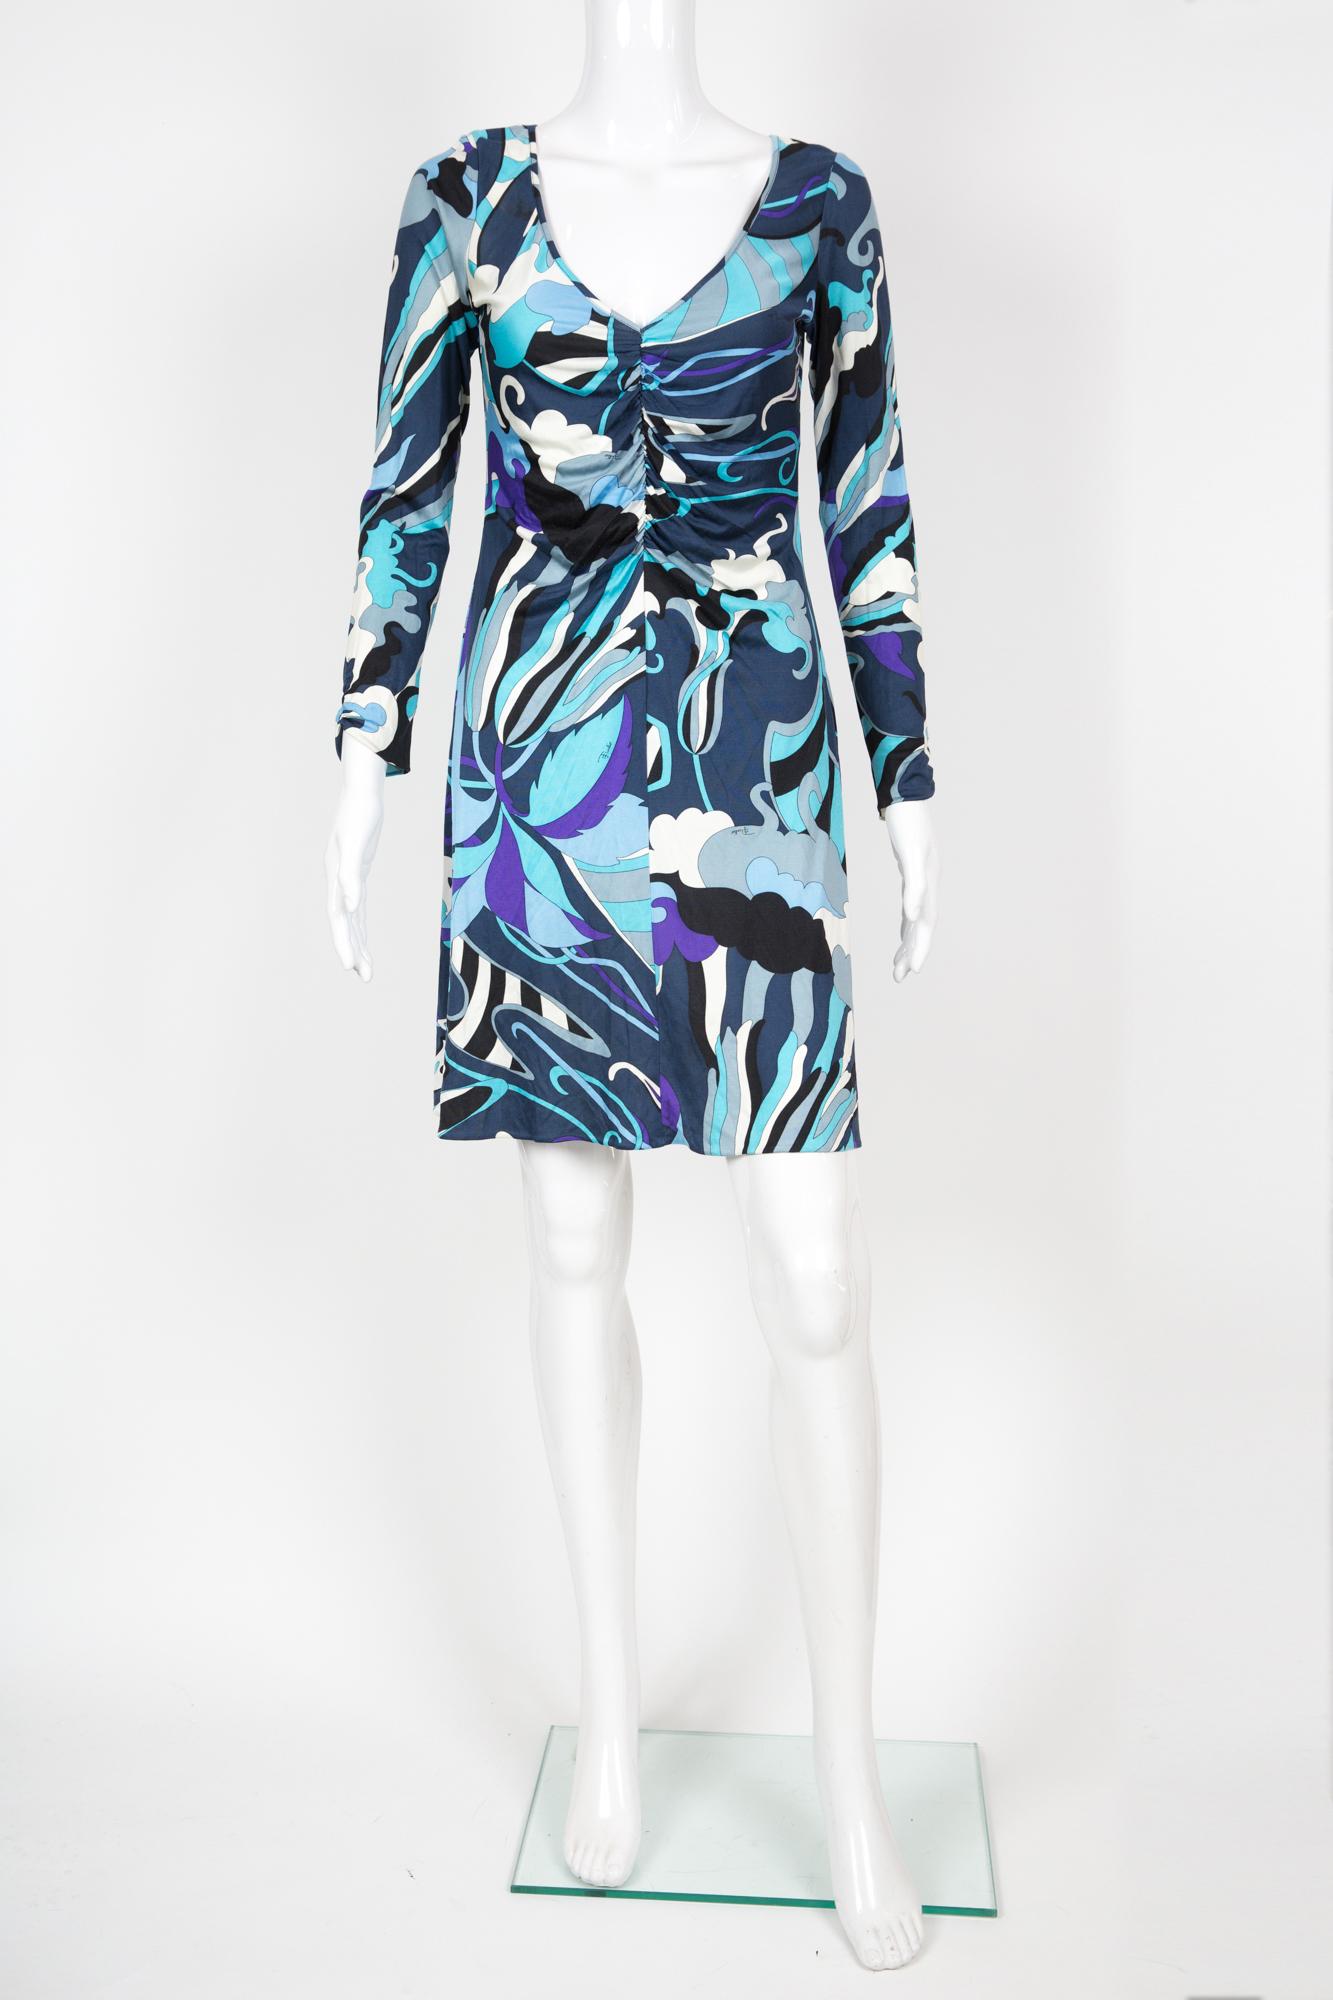 Emilio Pucci blue silk jersey printed dress featuring an iconic geometric print, a front gathered detail.
Composition: 100% silk
Estimated size IT42/38fr/US6 /UK10
Made in Italy. 
In good vintage condition. 
We guarantee you will receive this